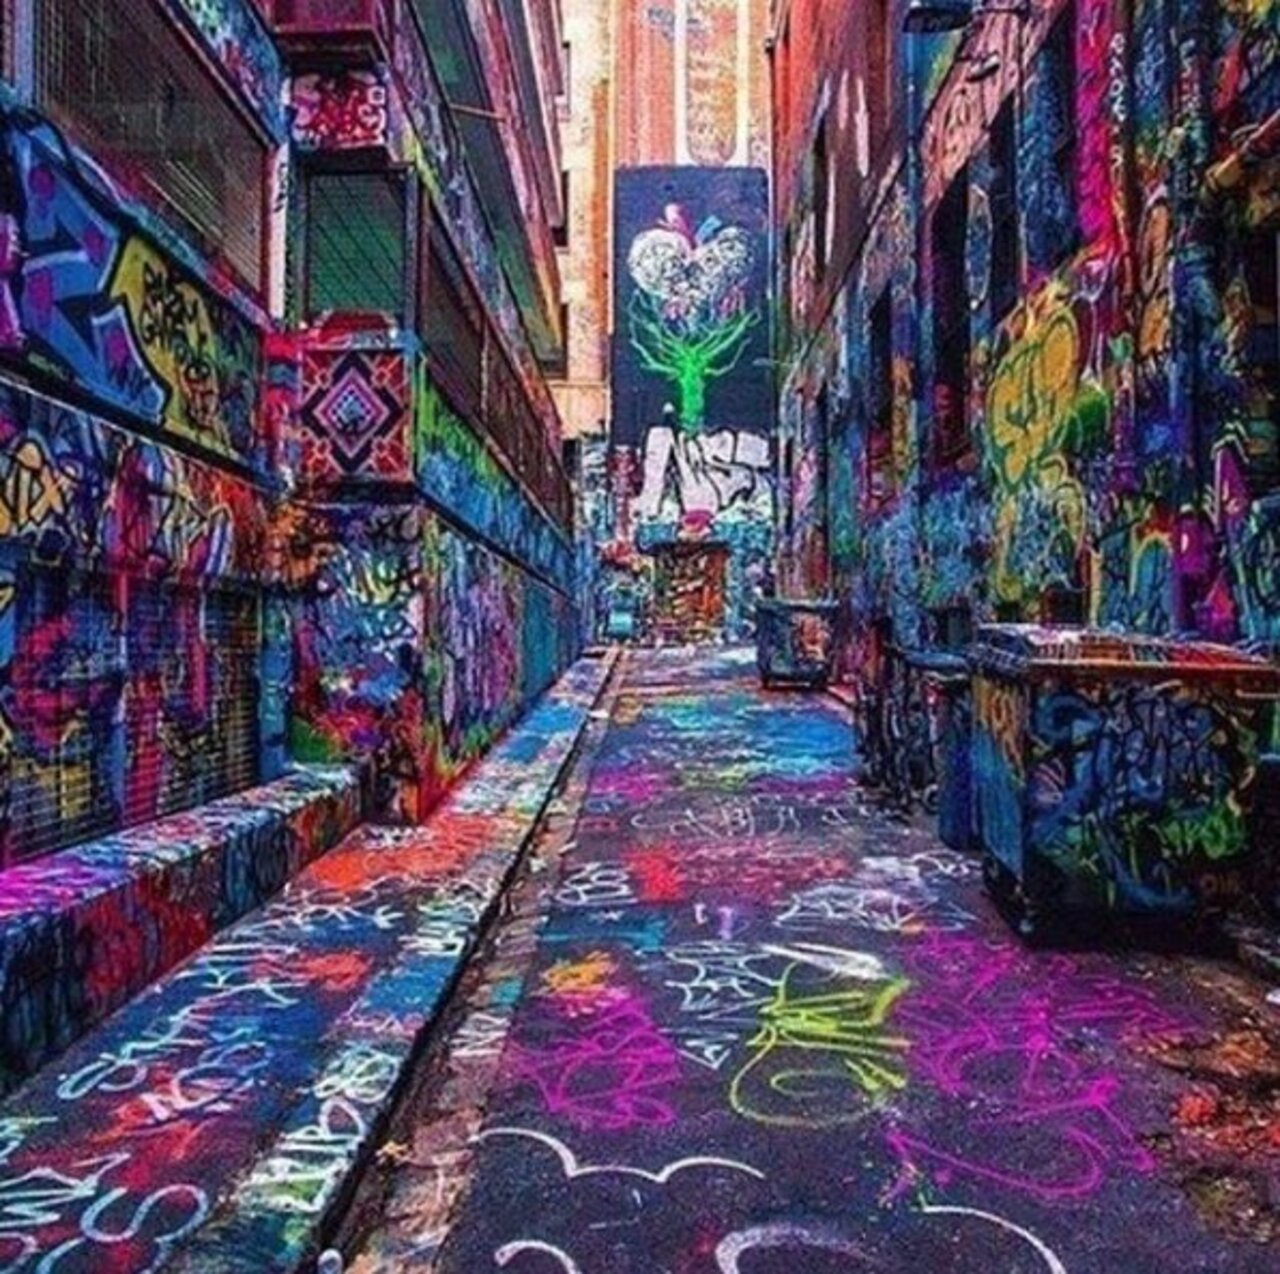 This is what you get when the city council declares a "graffiti tolerance zone"  -- Street in #Melbourne, #Australia. -- #globalstreetart #streetart #graffiti https://t.co/laqCl9p6jm